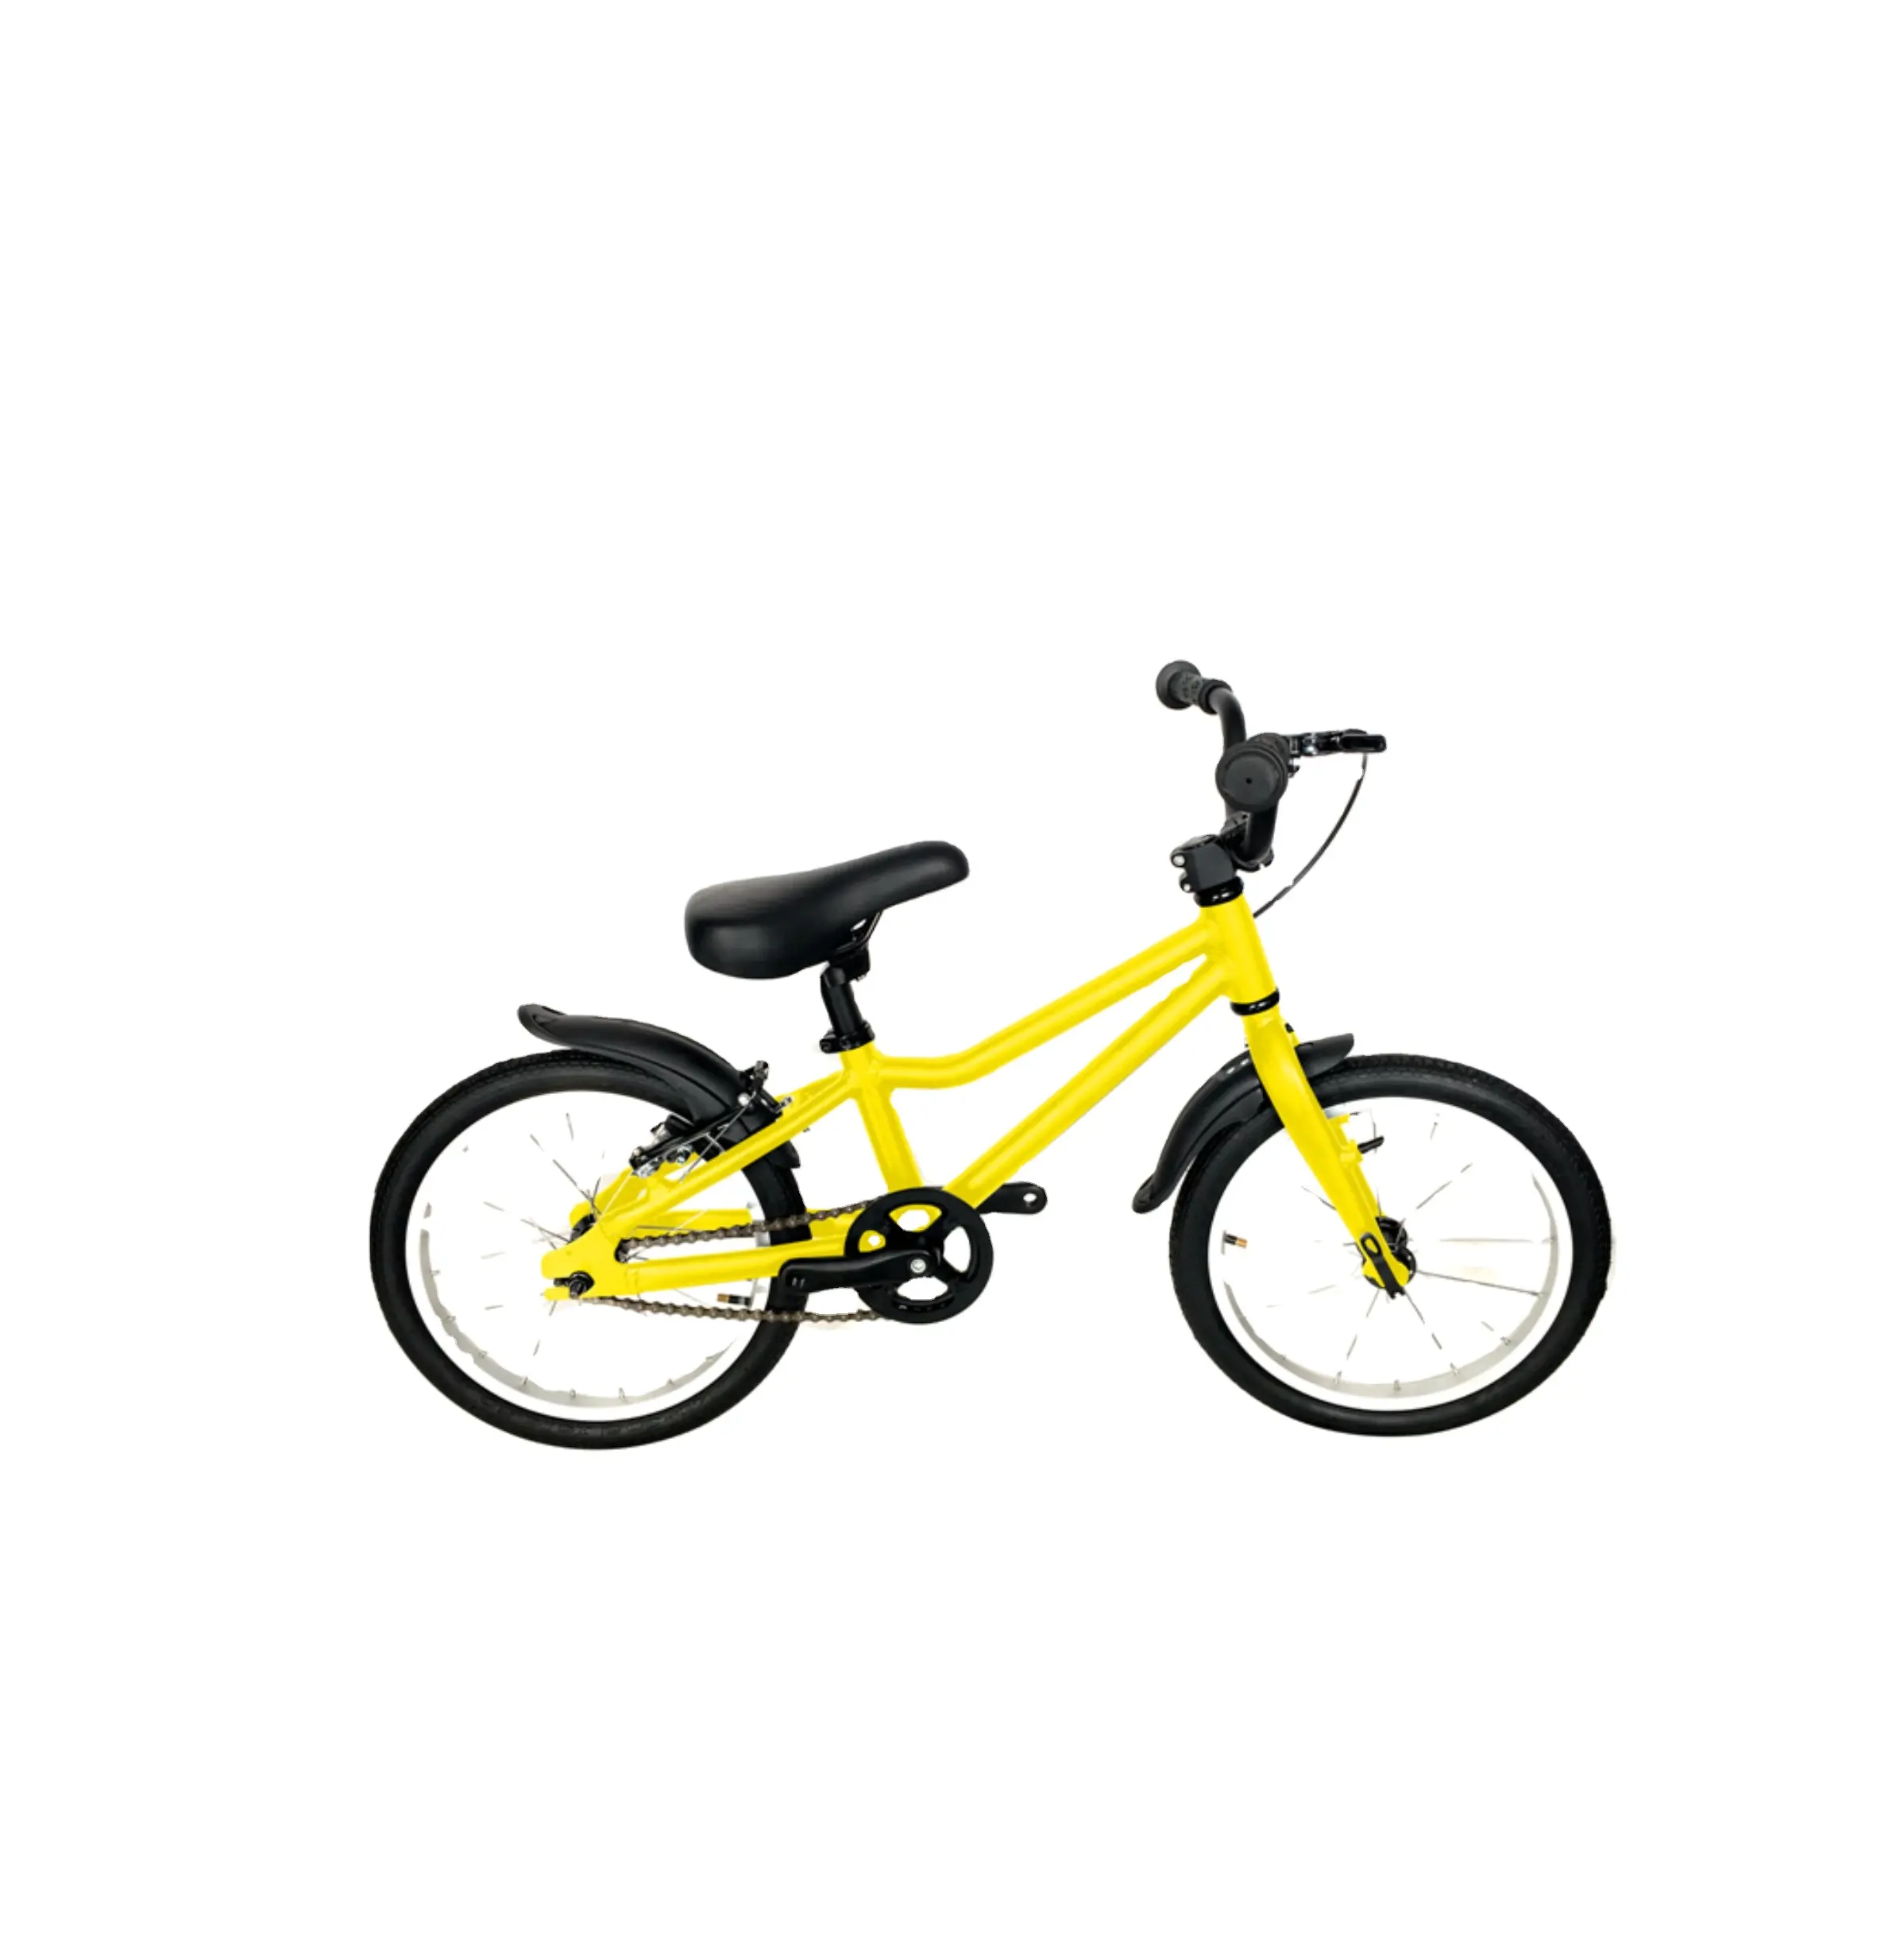 Newest Cheap 16 Inch Alloy Frame 12 Years Old Children Bike With Training Wheel